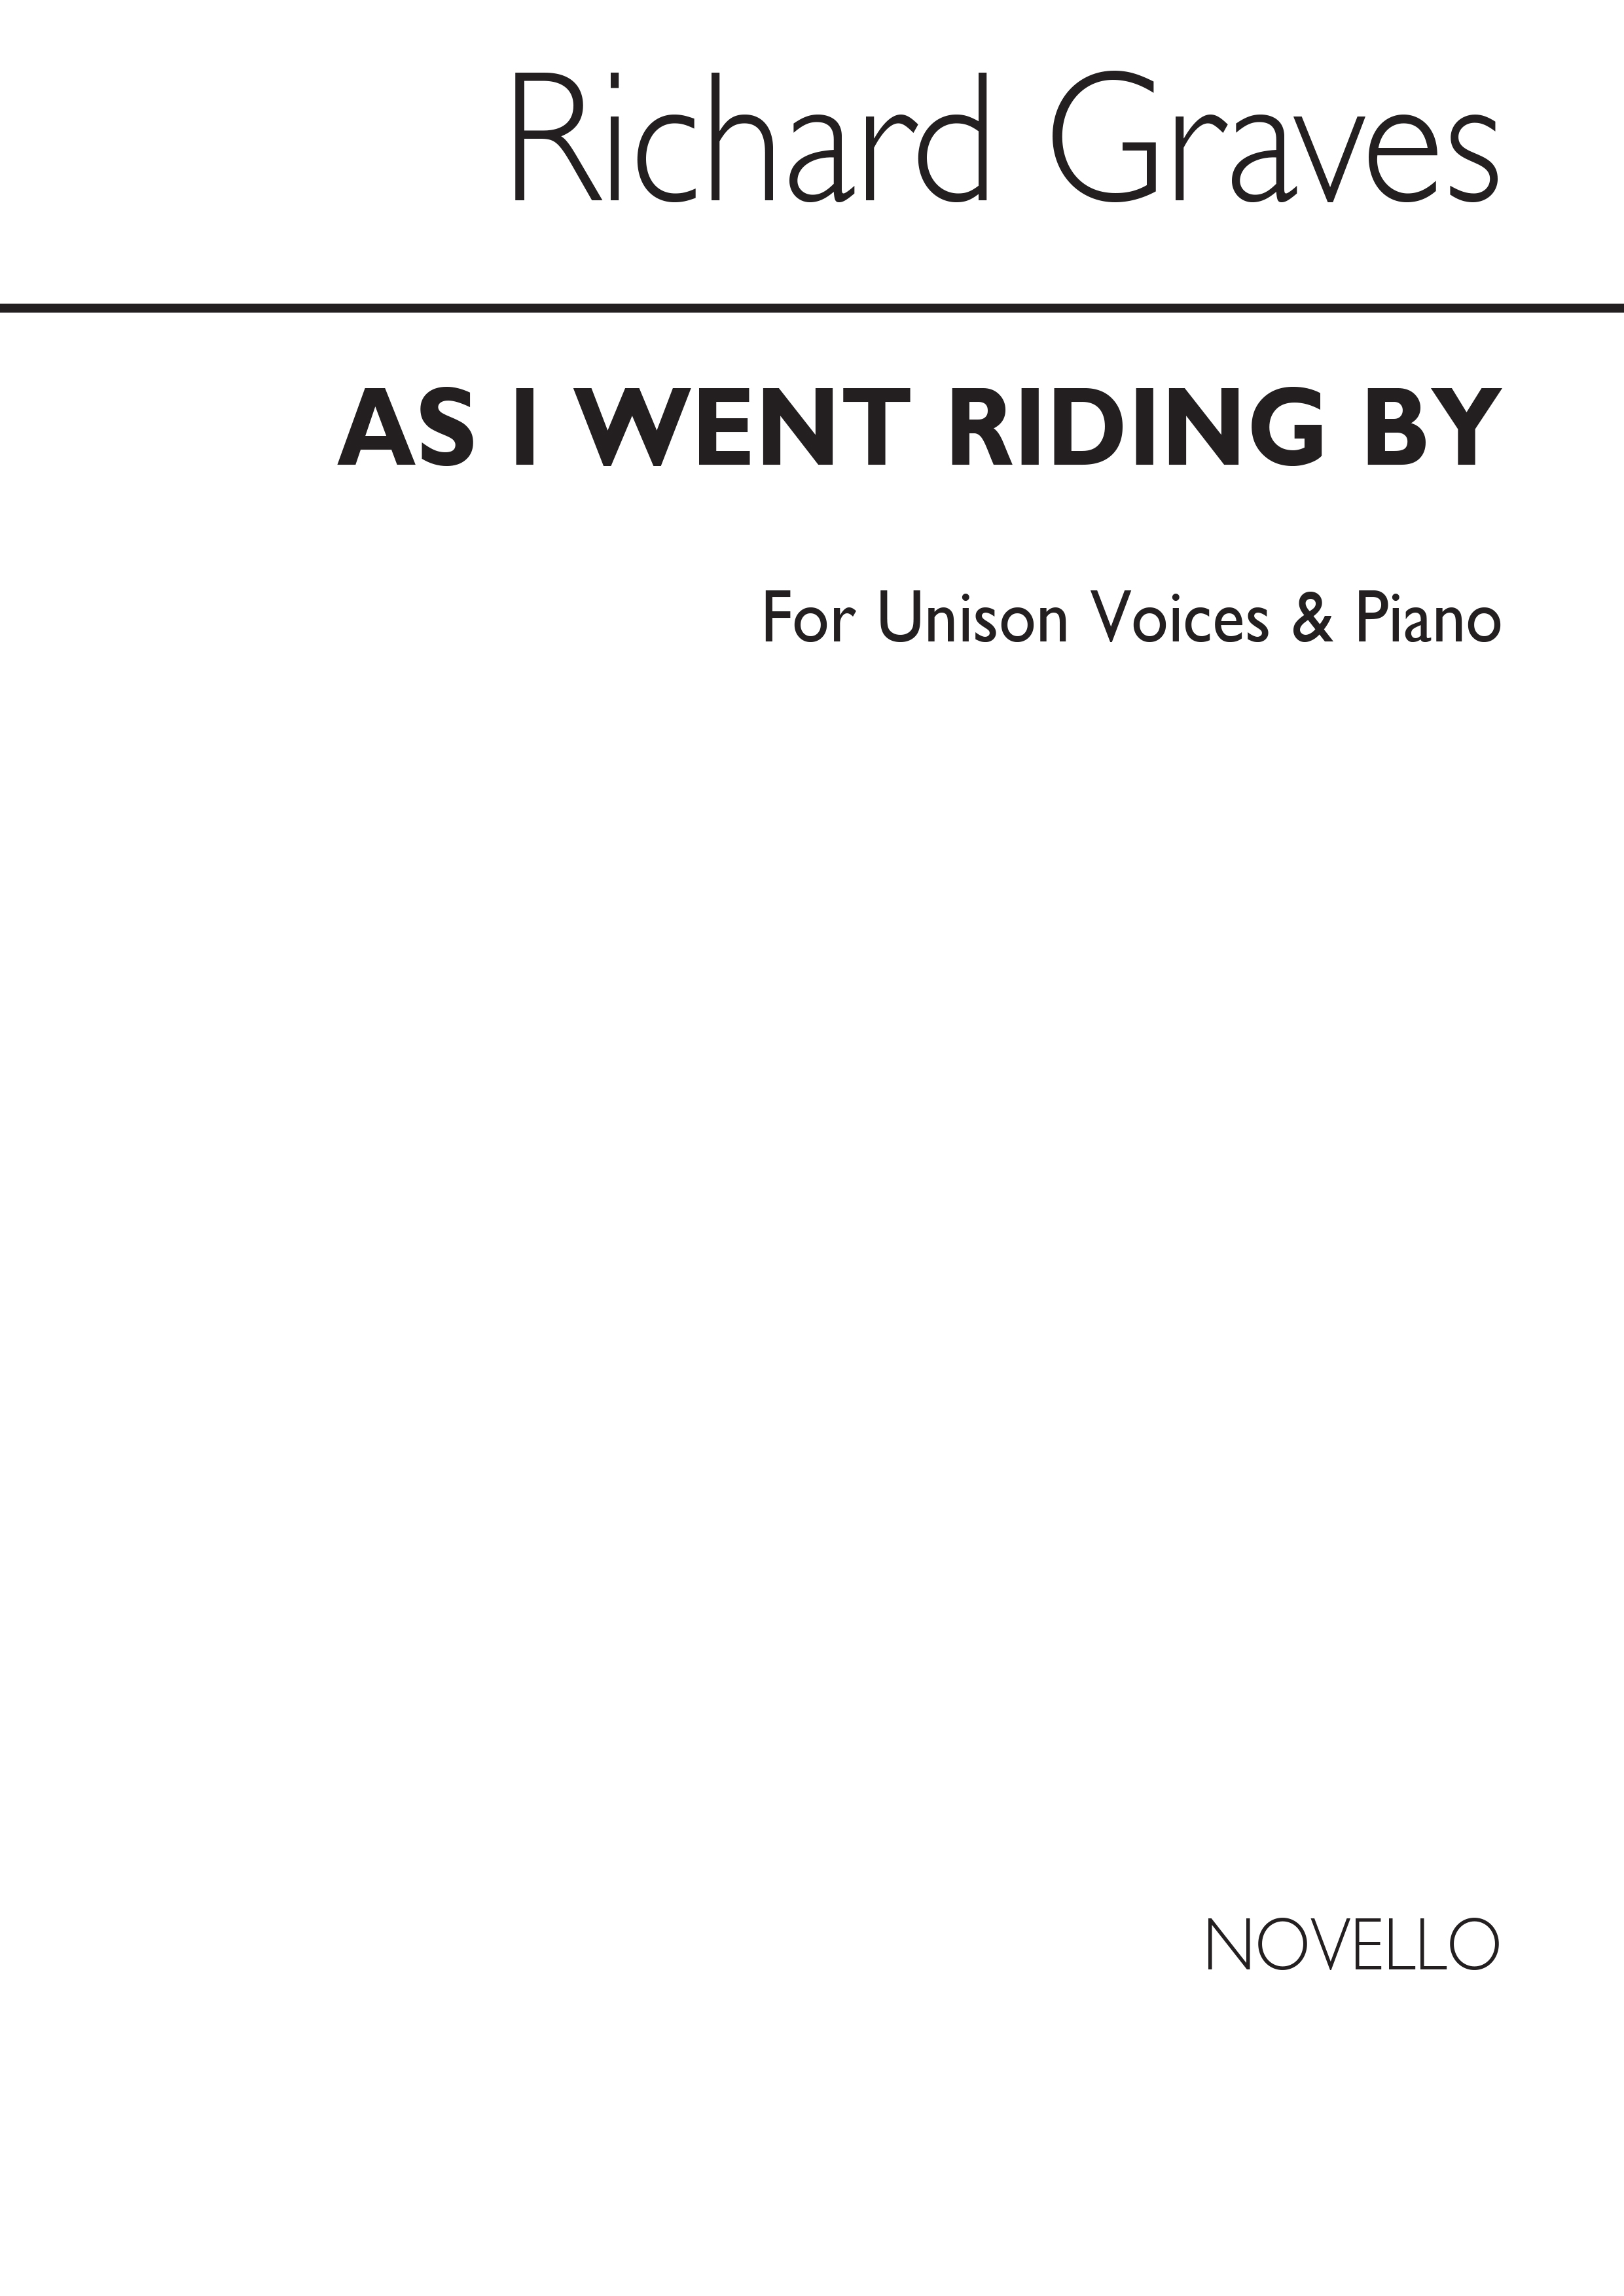 Richard Graves: As I Went Riding By for Unison Voices